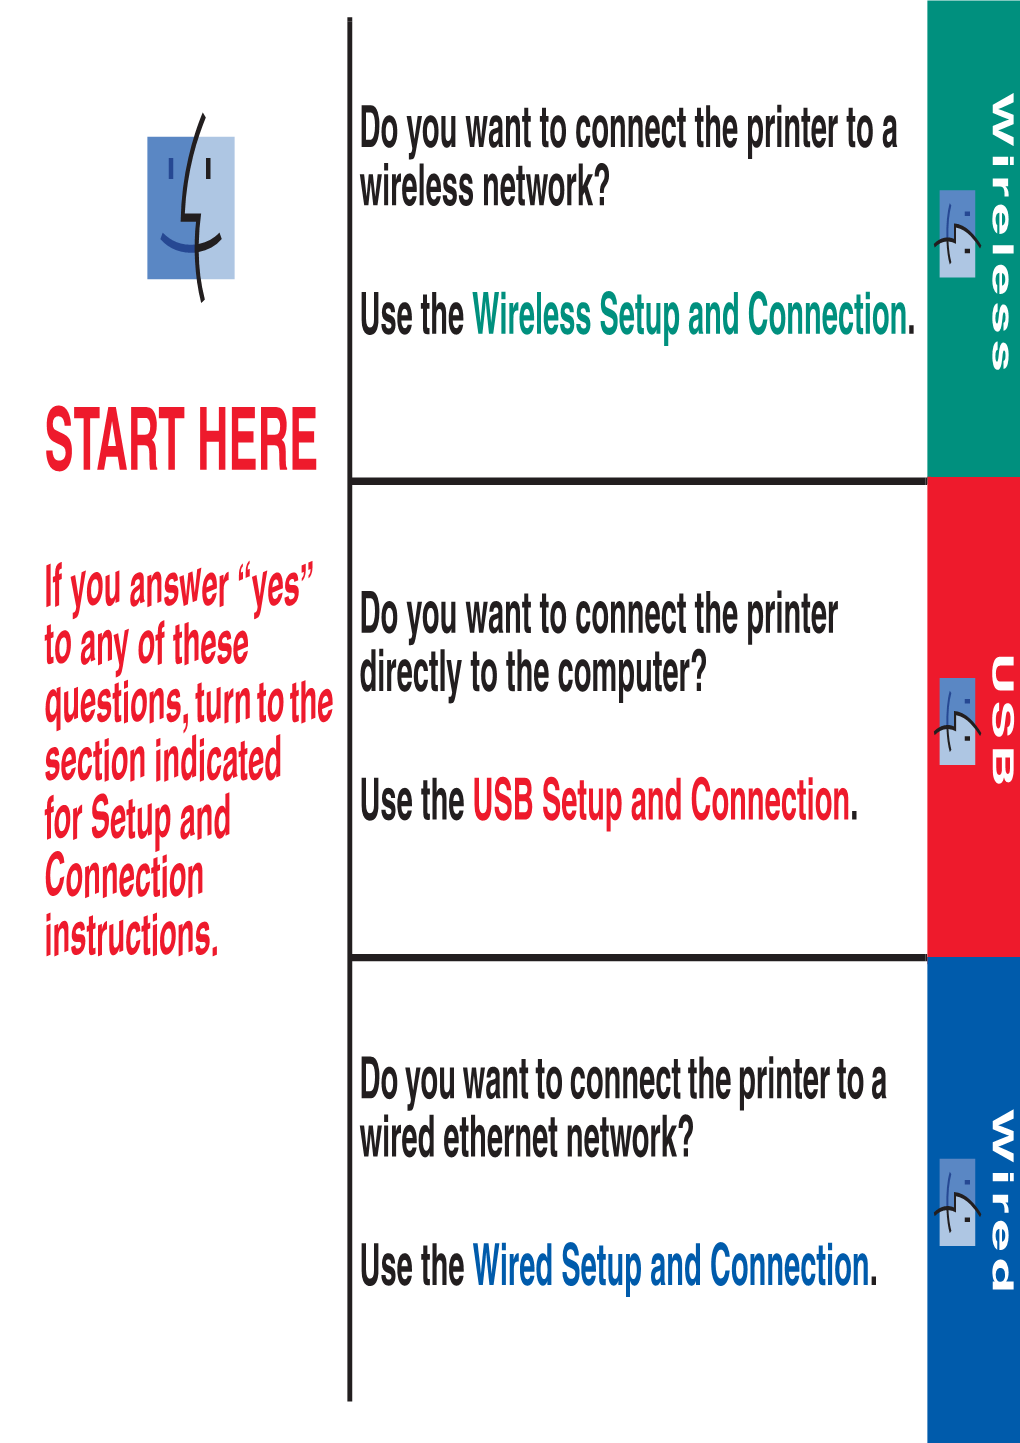 START HERE START “Yes” Answer If You of These to Any Questions, Turn to the Section Indicated Setup and for Connection Instructions